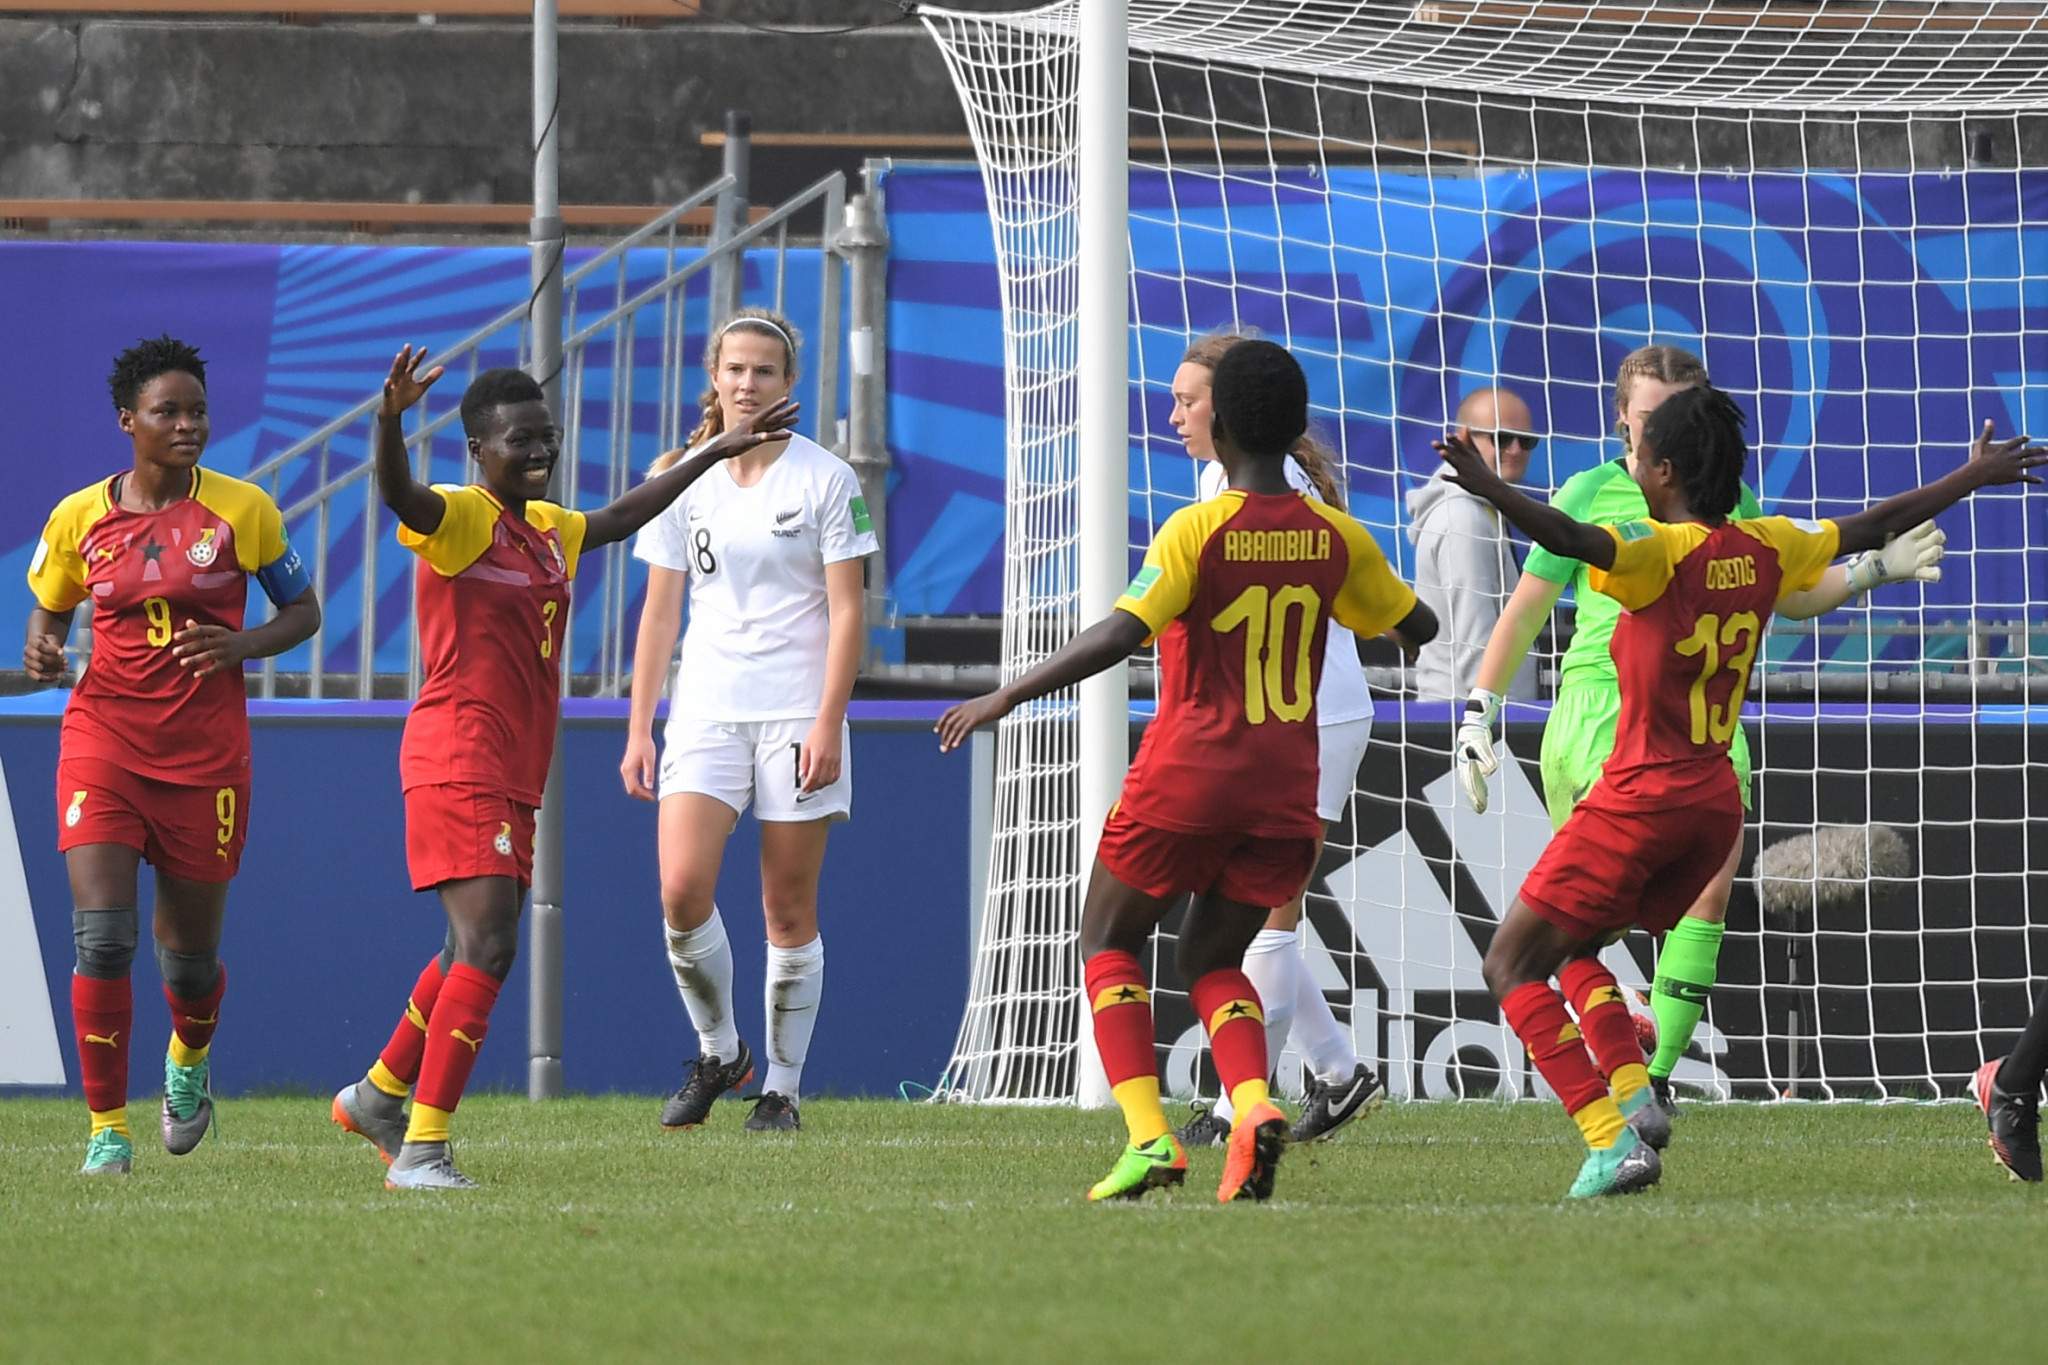 Reports emerged this week that Ghana had been stripped of the 2018 Women's Africa Cup of Nations ©Getty Images